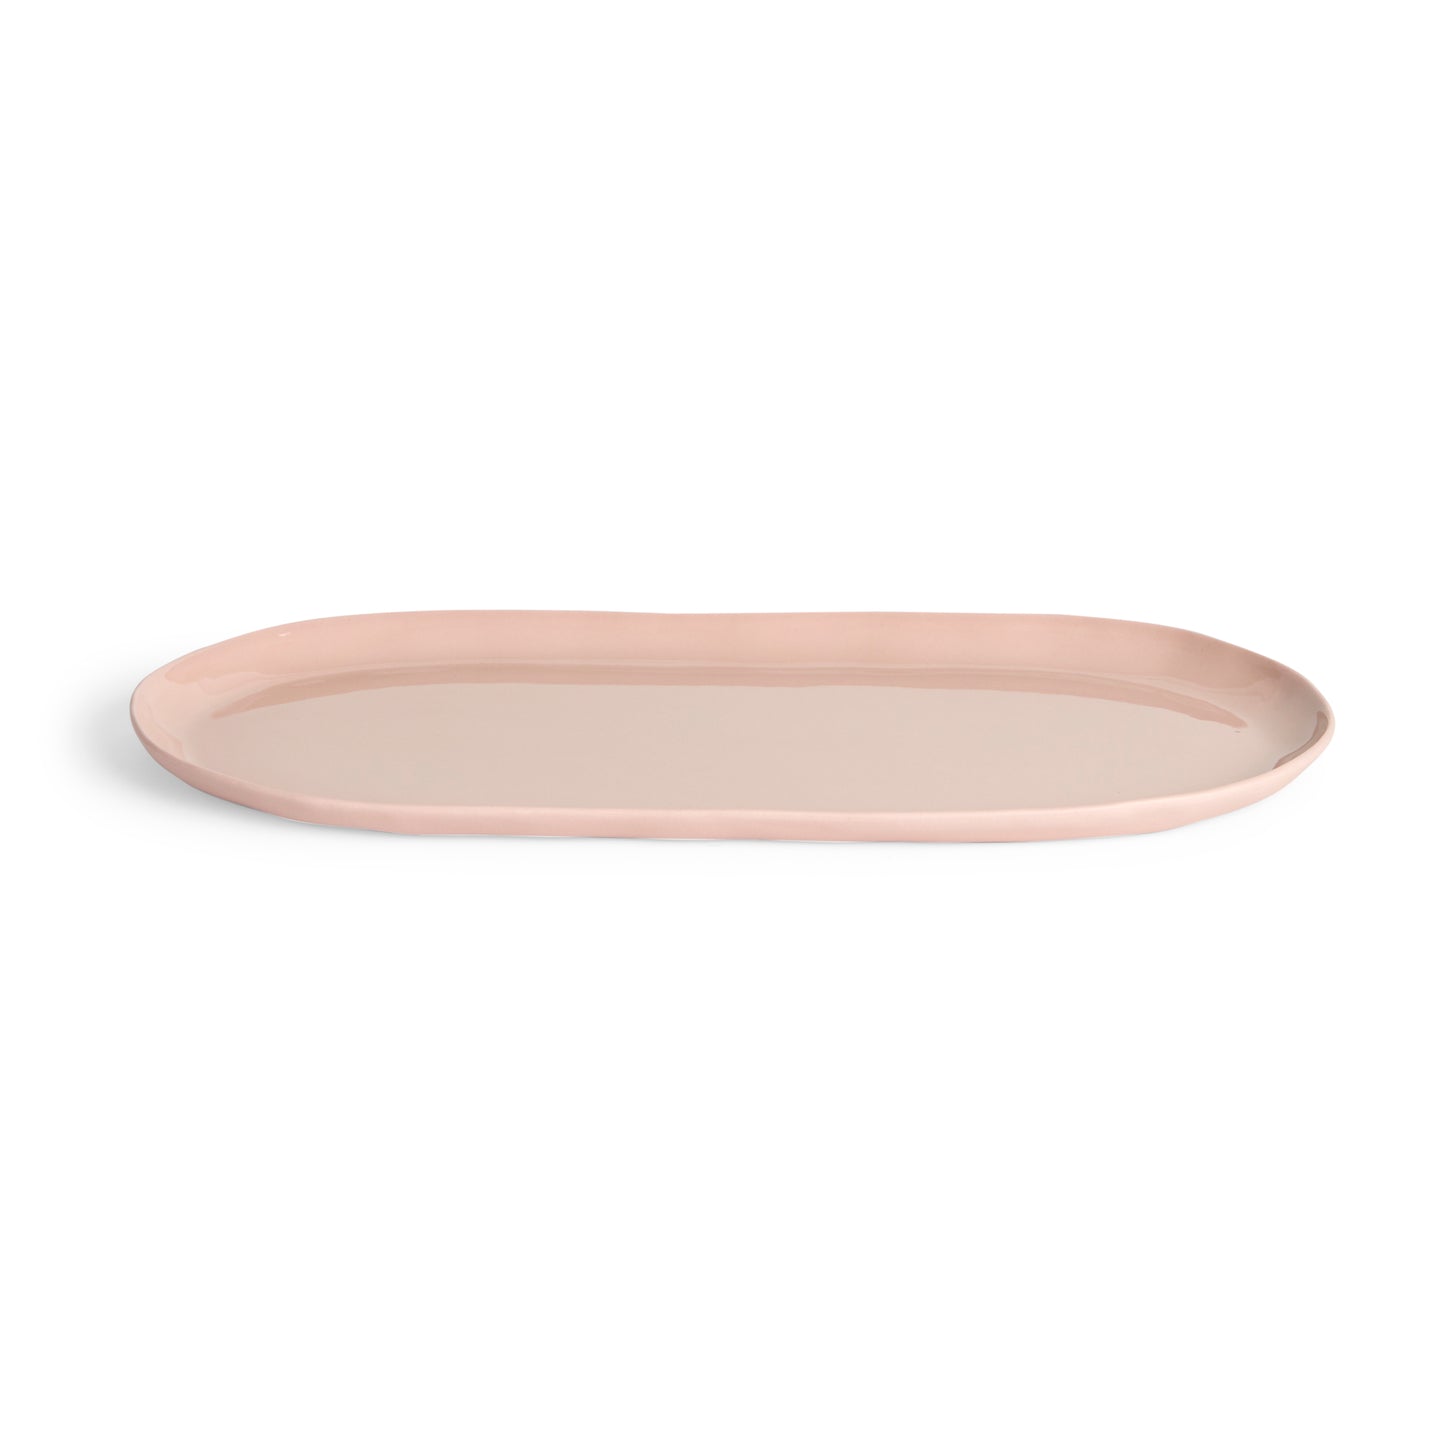 Cloud Oval Dish in Icy Pink